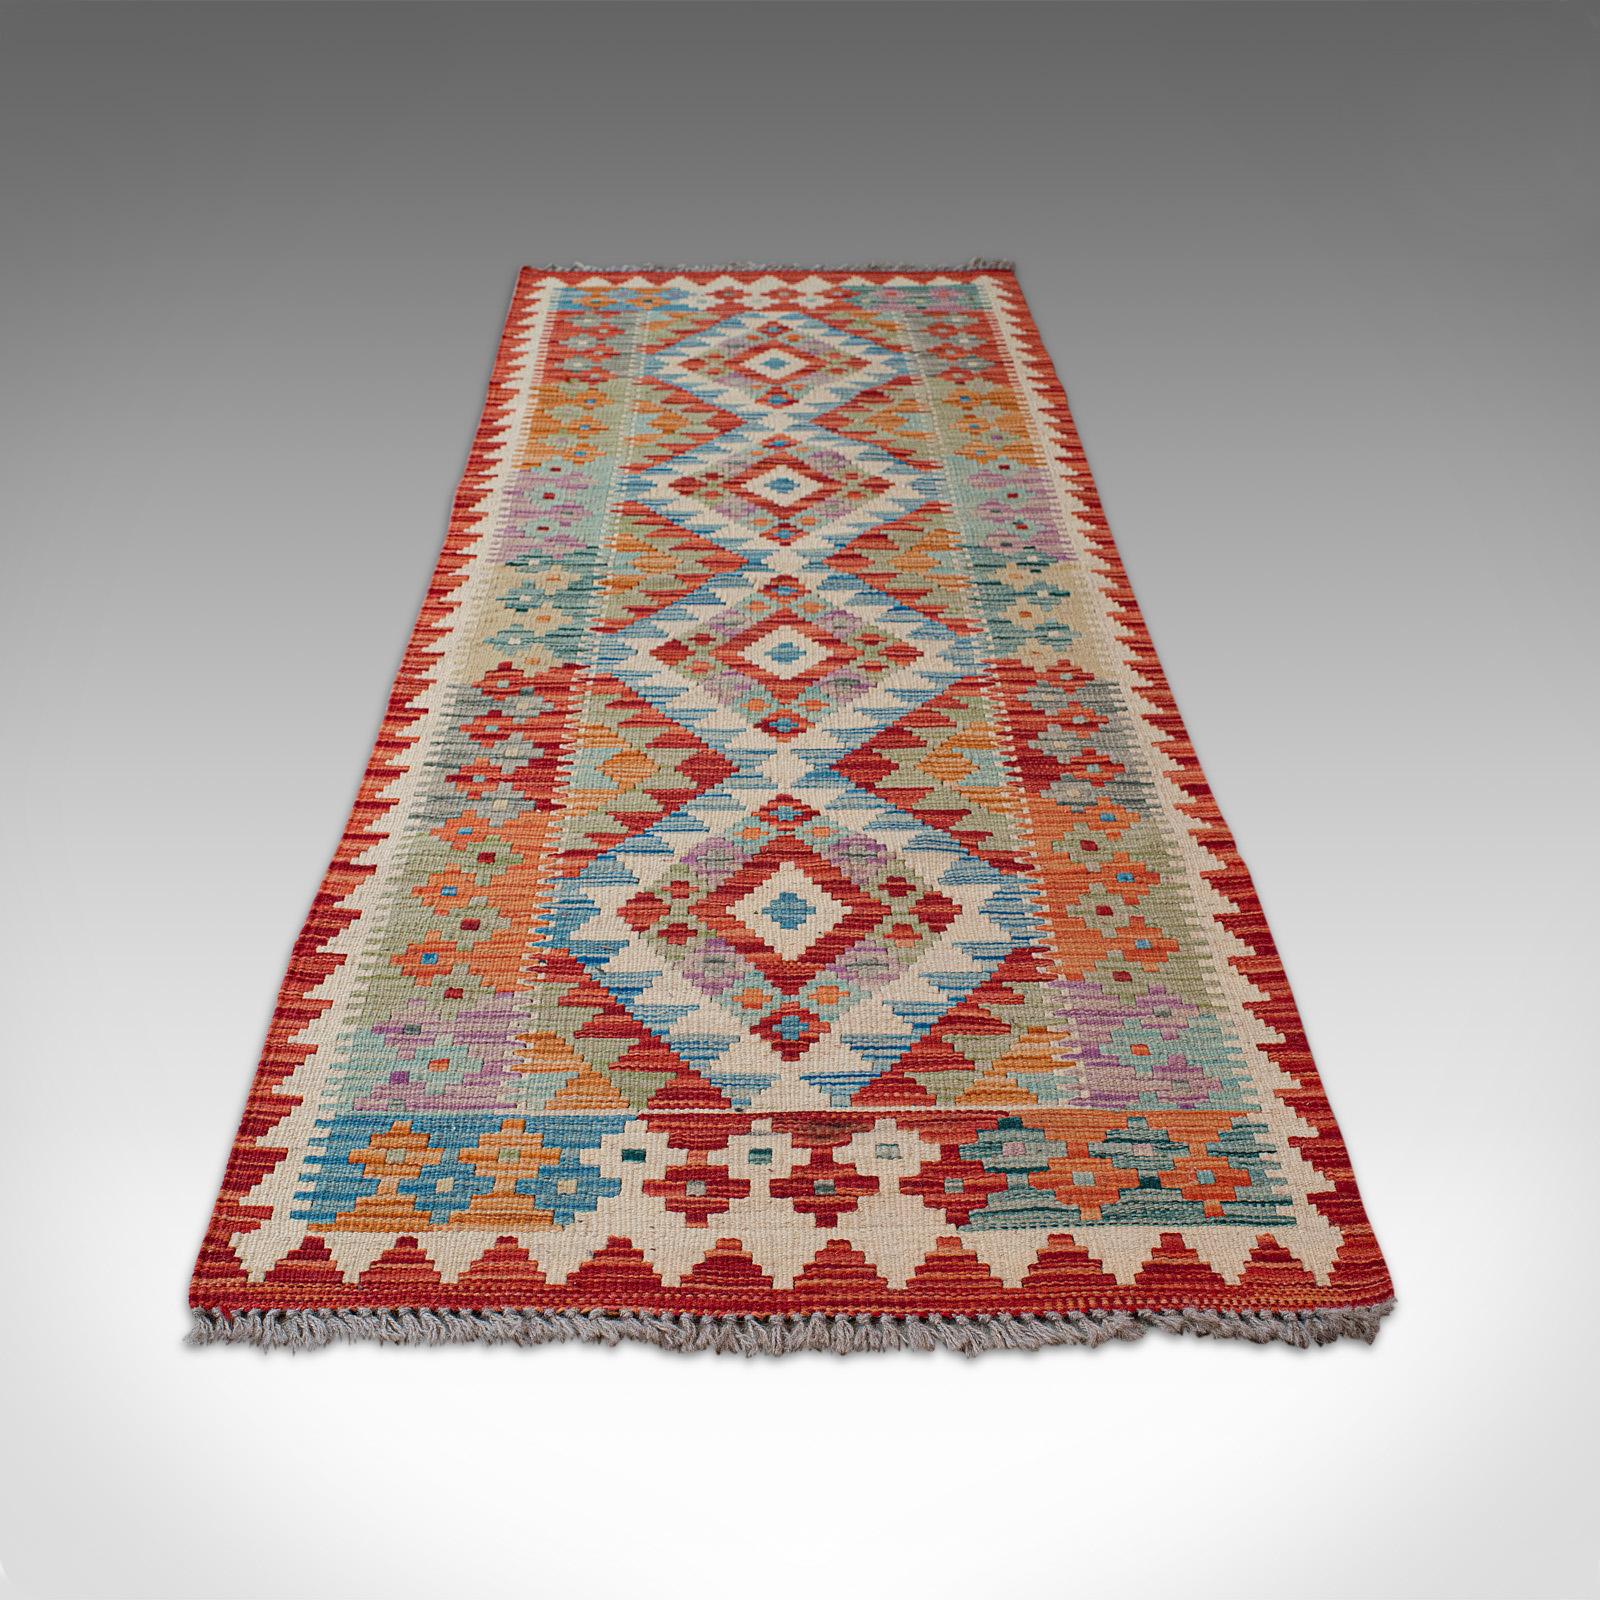 This is a colorful vintage Choli Kilim runner. A Persian, handwoven, vegetable-dyed decorative hall carpet, dating to the mid-20th century, circa 1960.

A striking, versatile hallway runner at a size of 69cm (27.25'') x 206cm (81'')
Displaying a